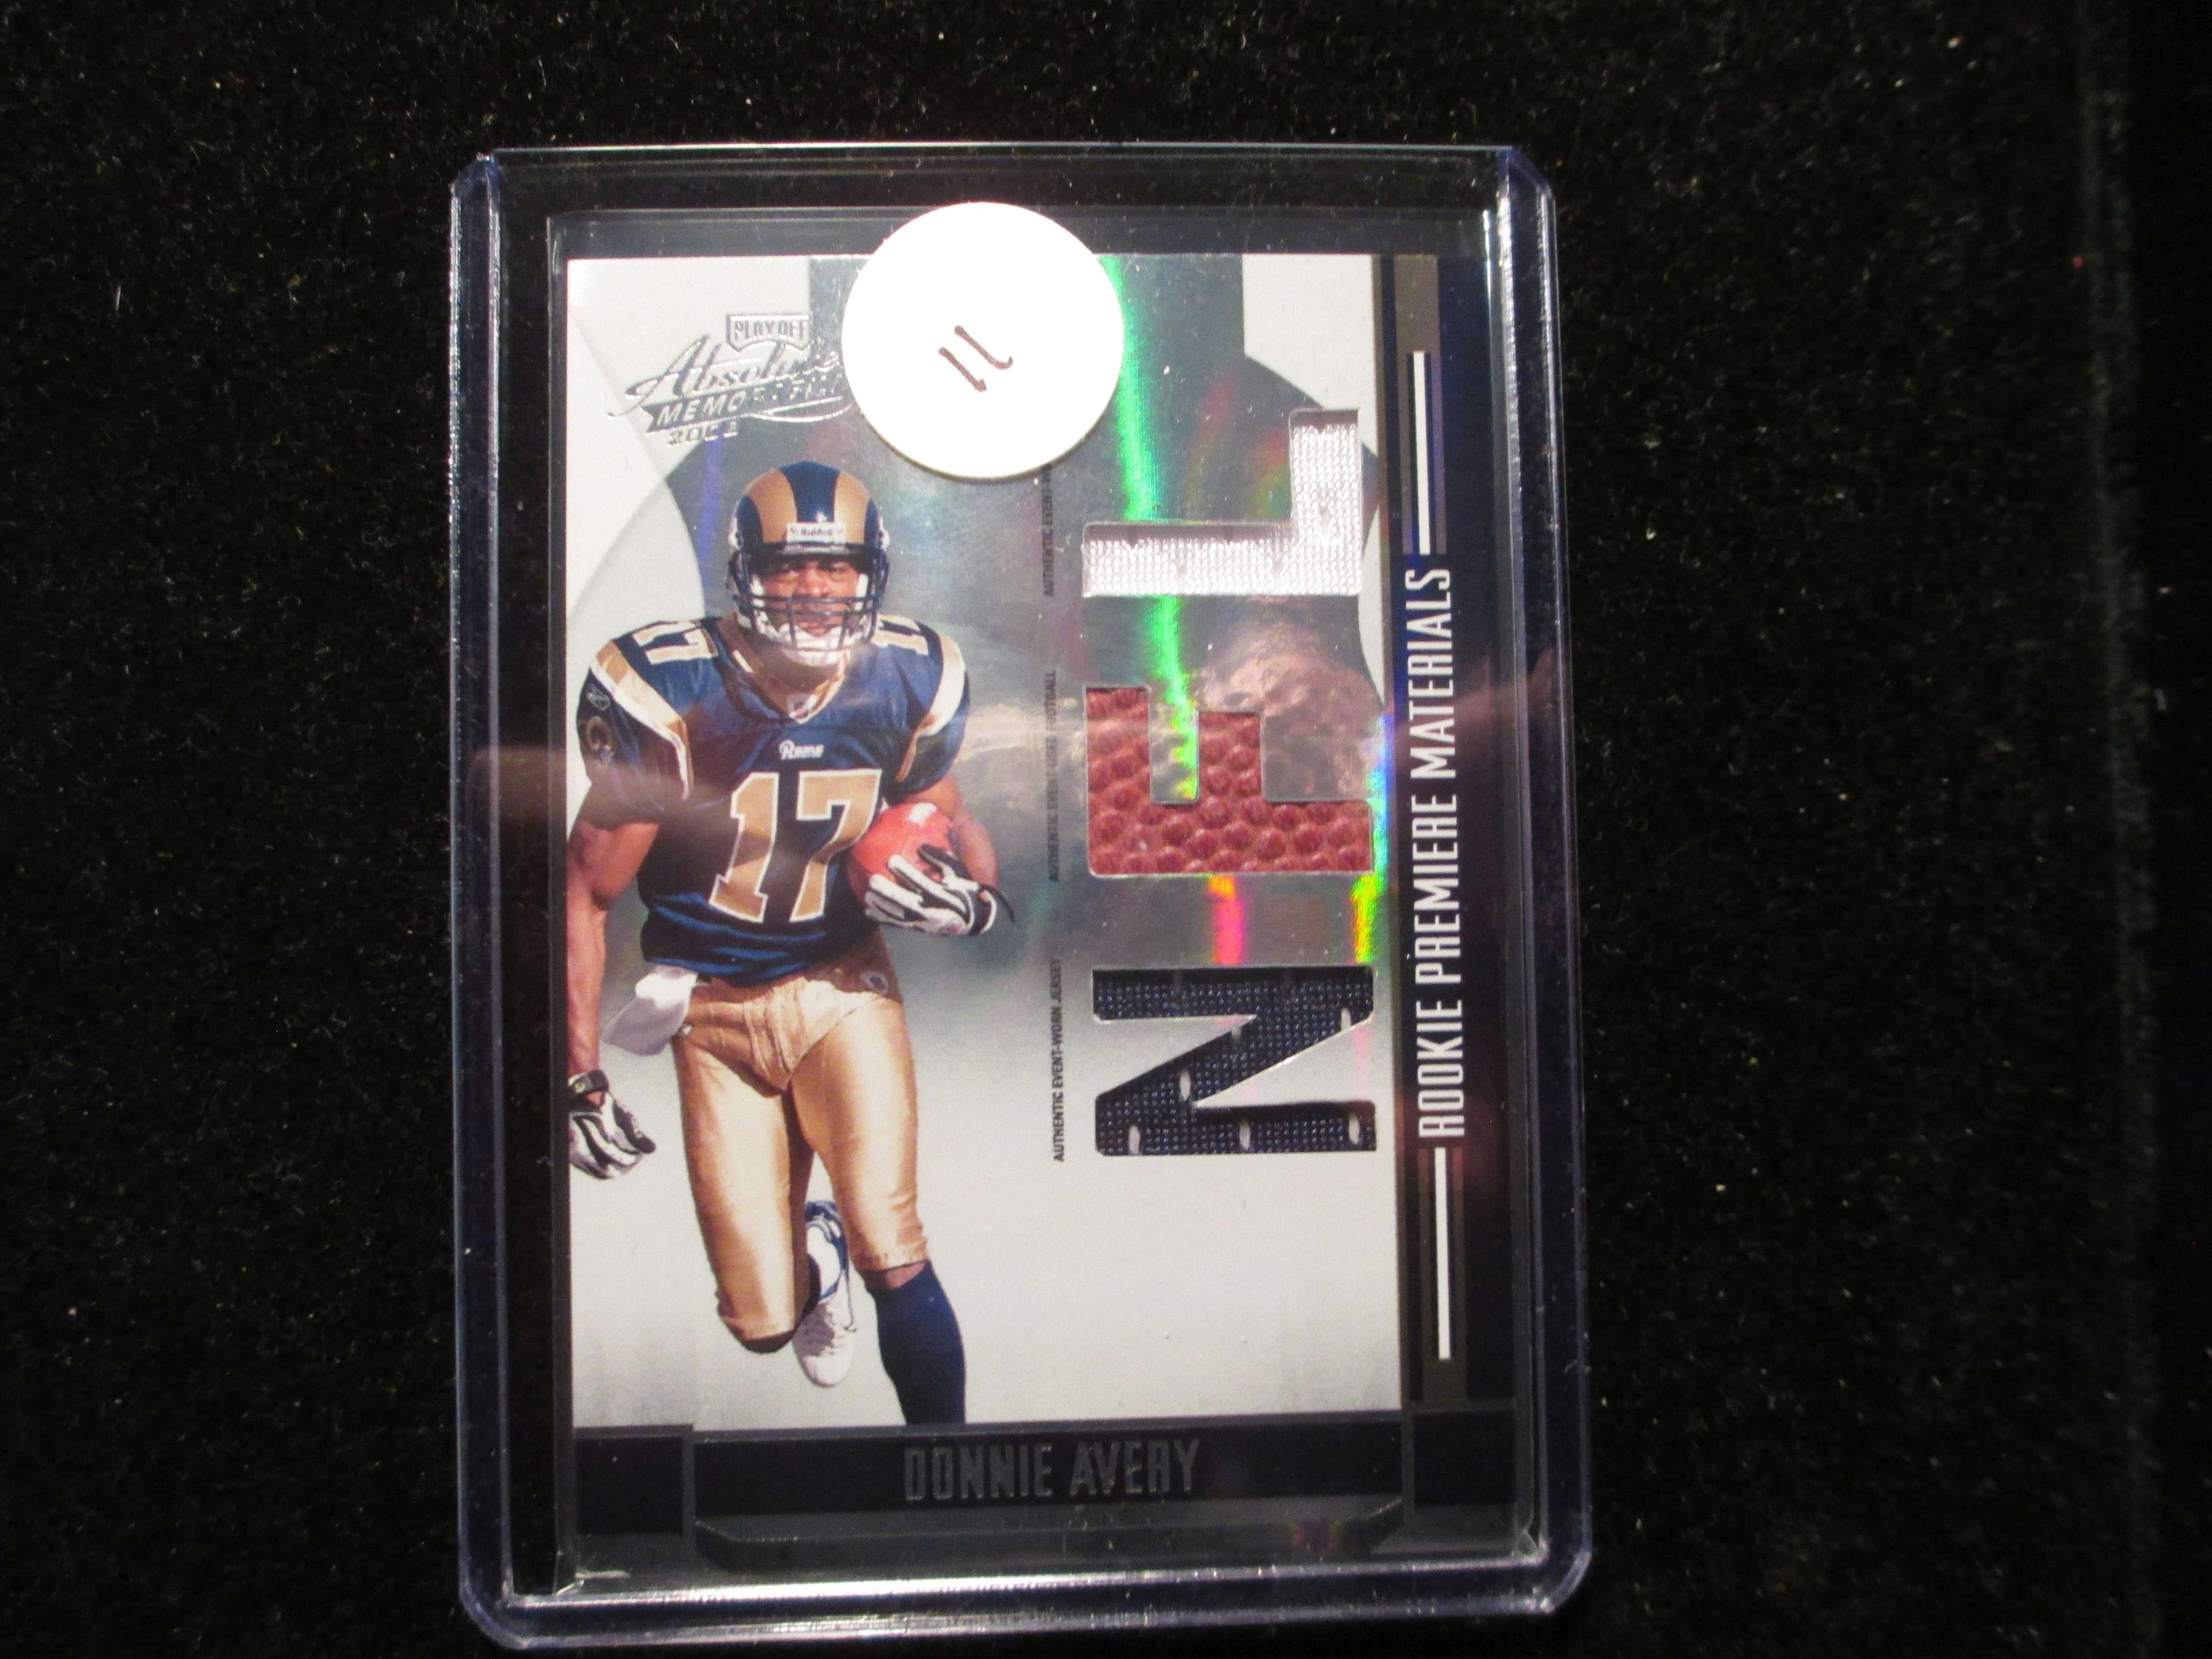 2008 Playoff Football Triple Relic Card Short Print Of 199